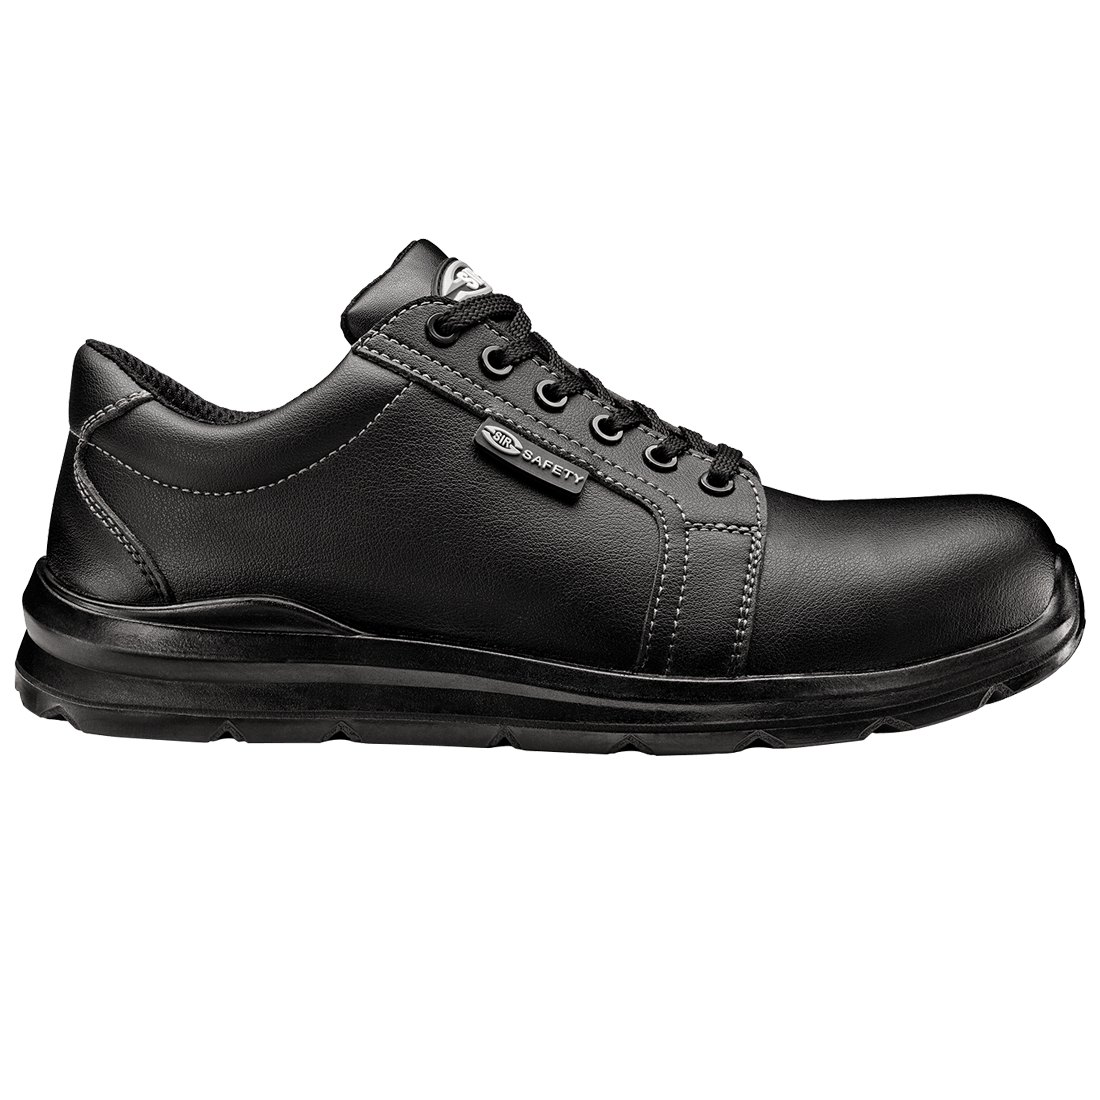 LOW BLACK FOBIA SHOE | Sir Safety System